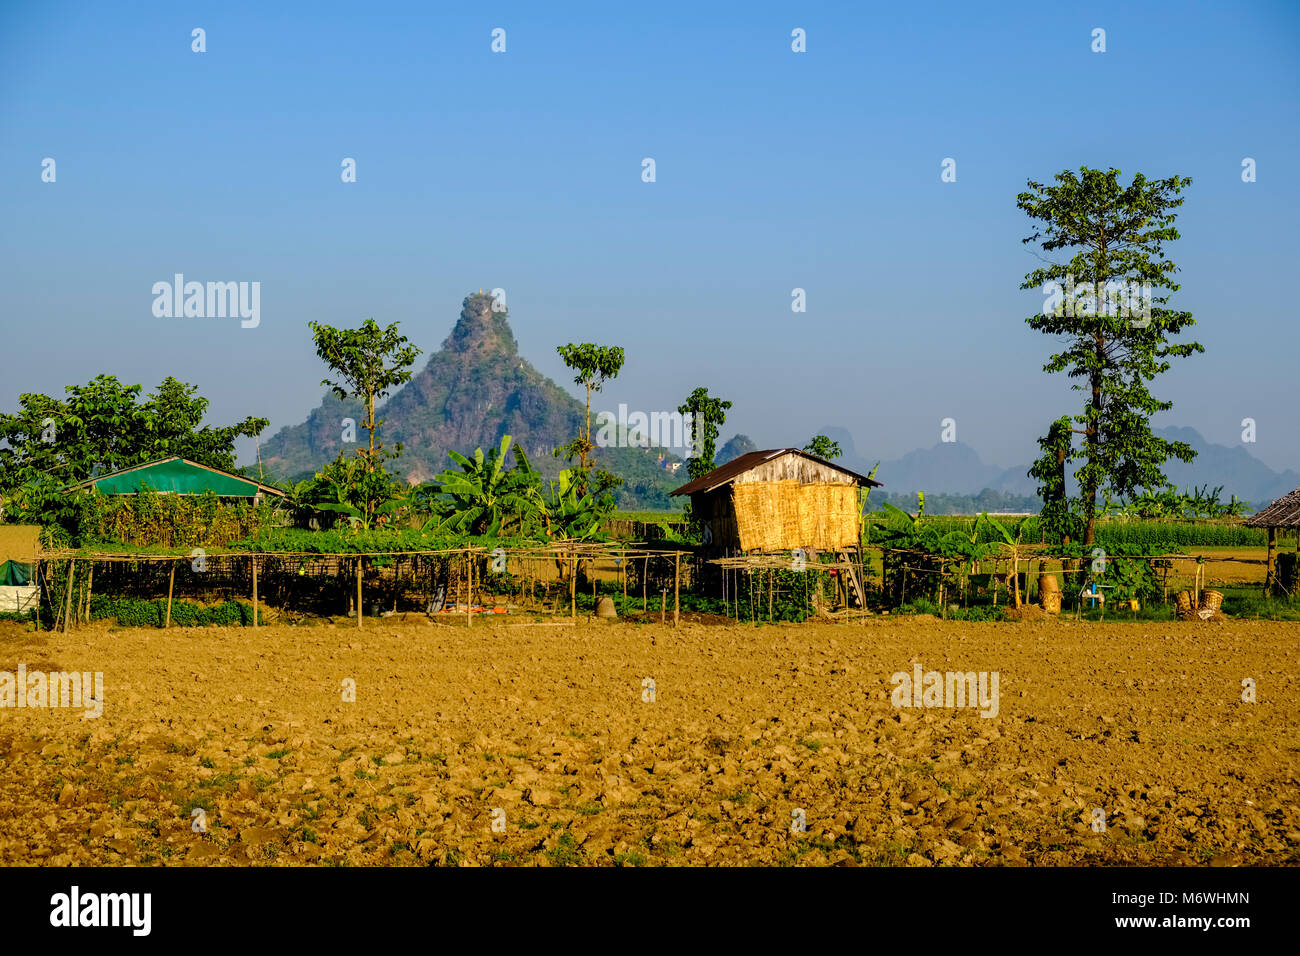 Agricultural landscape with farmers huts and Hpa-Pu hill in the distance Stock Photo